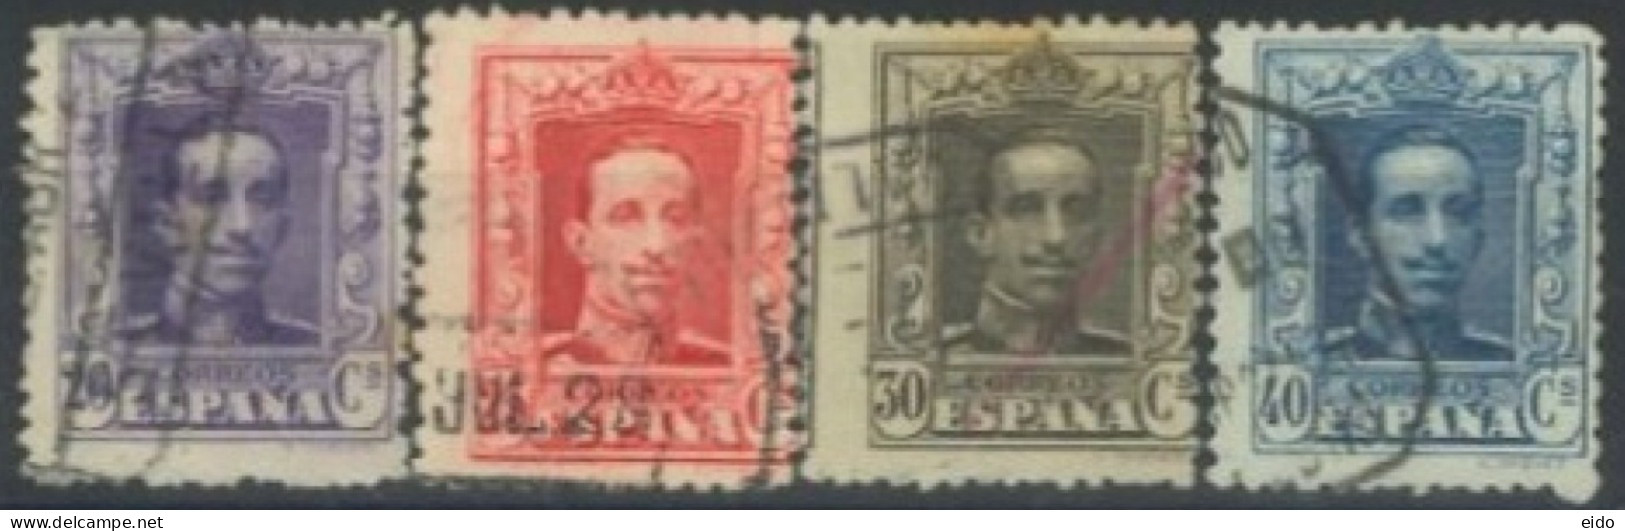 SPAIN, 1922/26, KING ALFONSO XIII STAMPS SET OF 4 # 337/40, USED. - Used Stamps